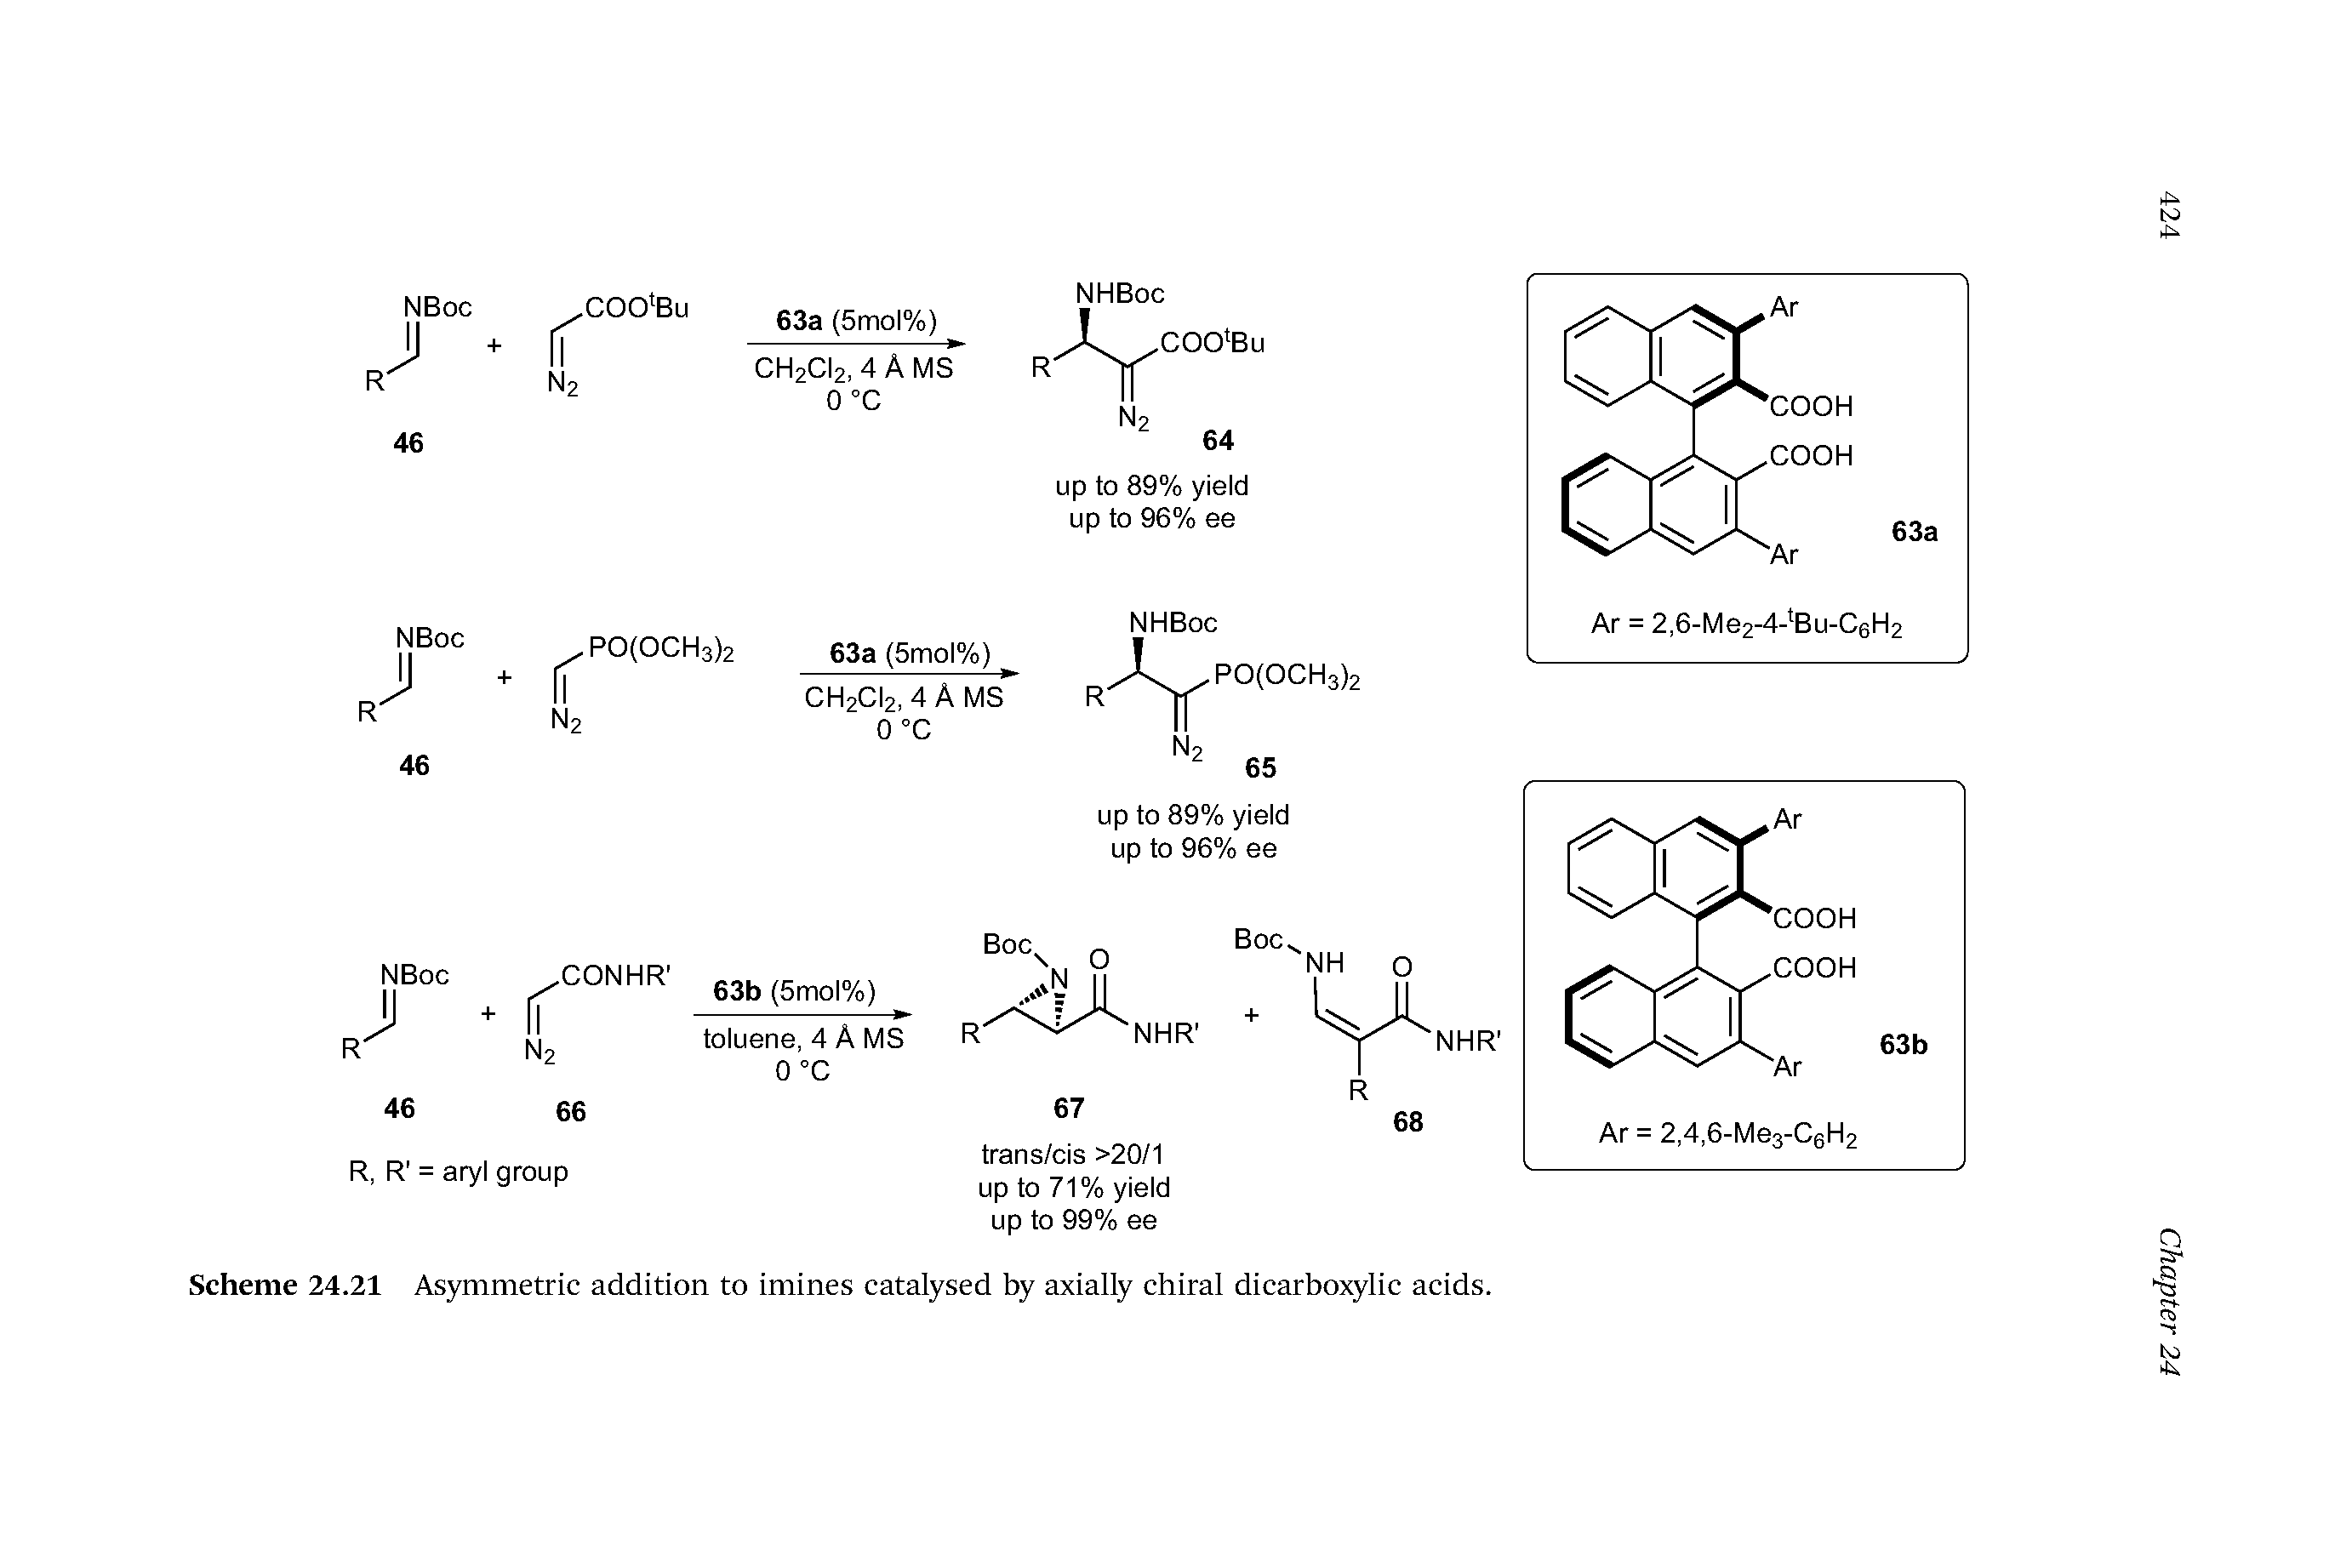 Scheme 24.21 Asymmetric addition to imines catalysed by axially chiral dicarboxylic acids.